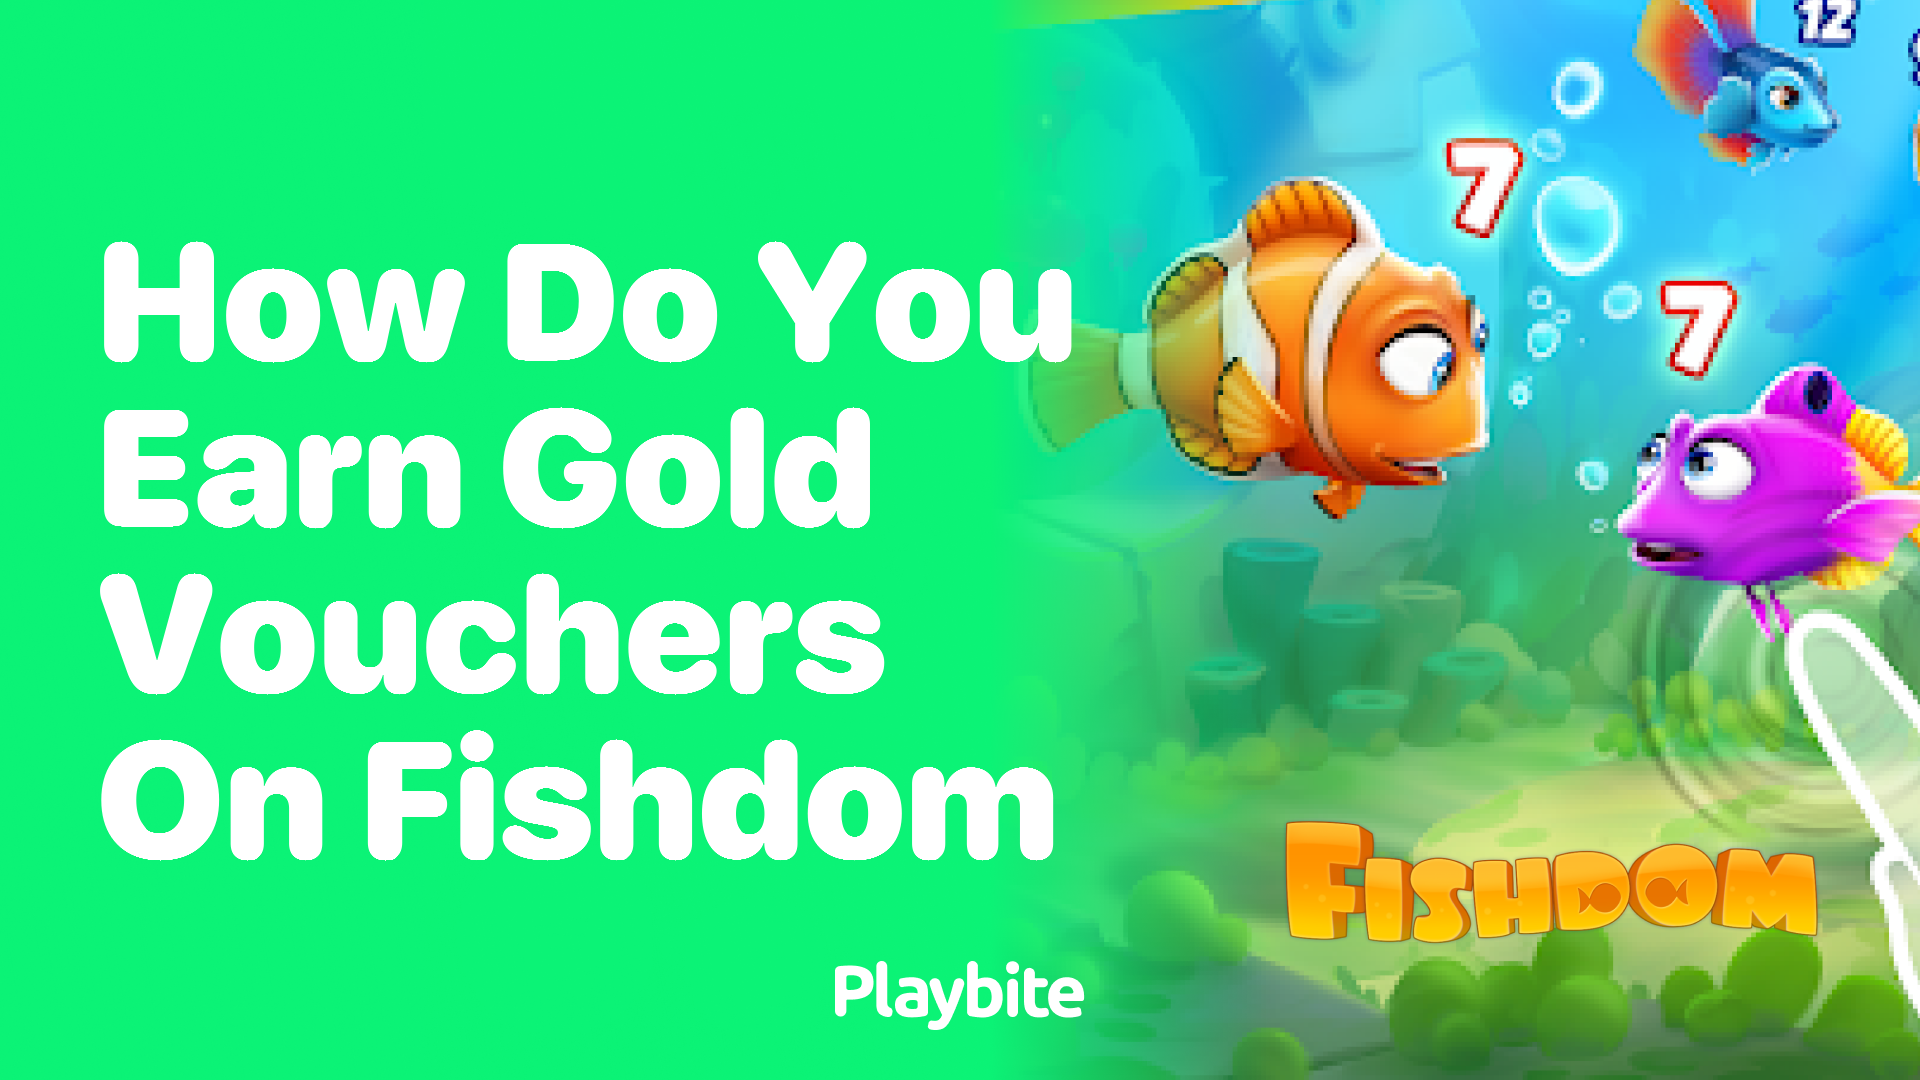 How Do You Earn Gold Vouchers on Fishdom?